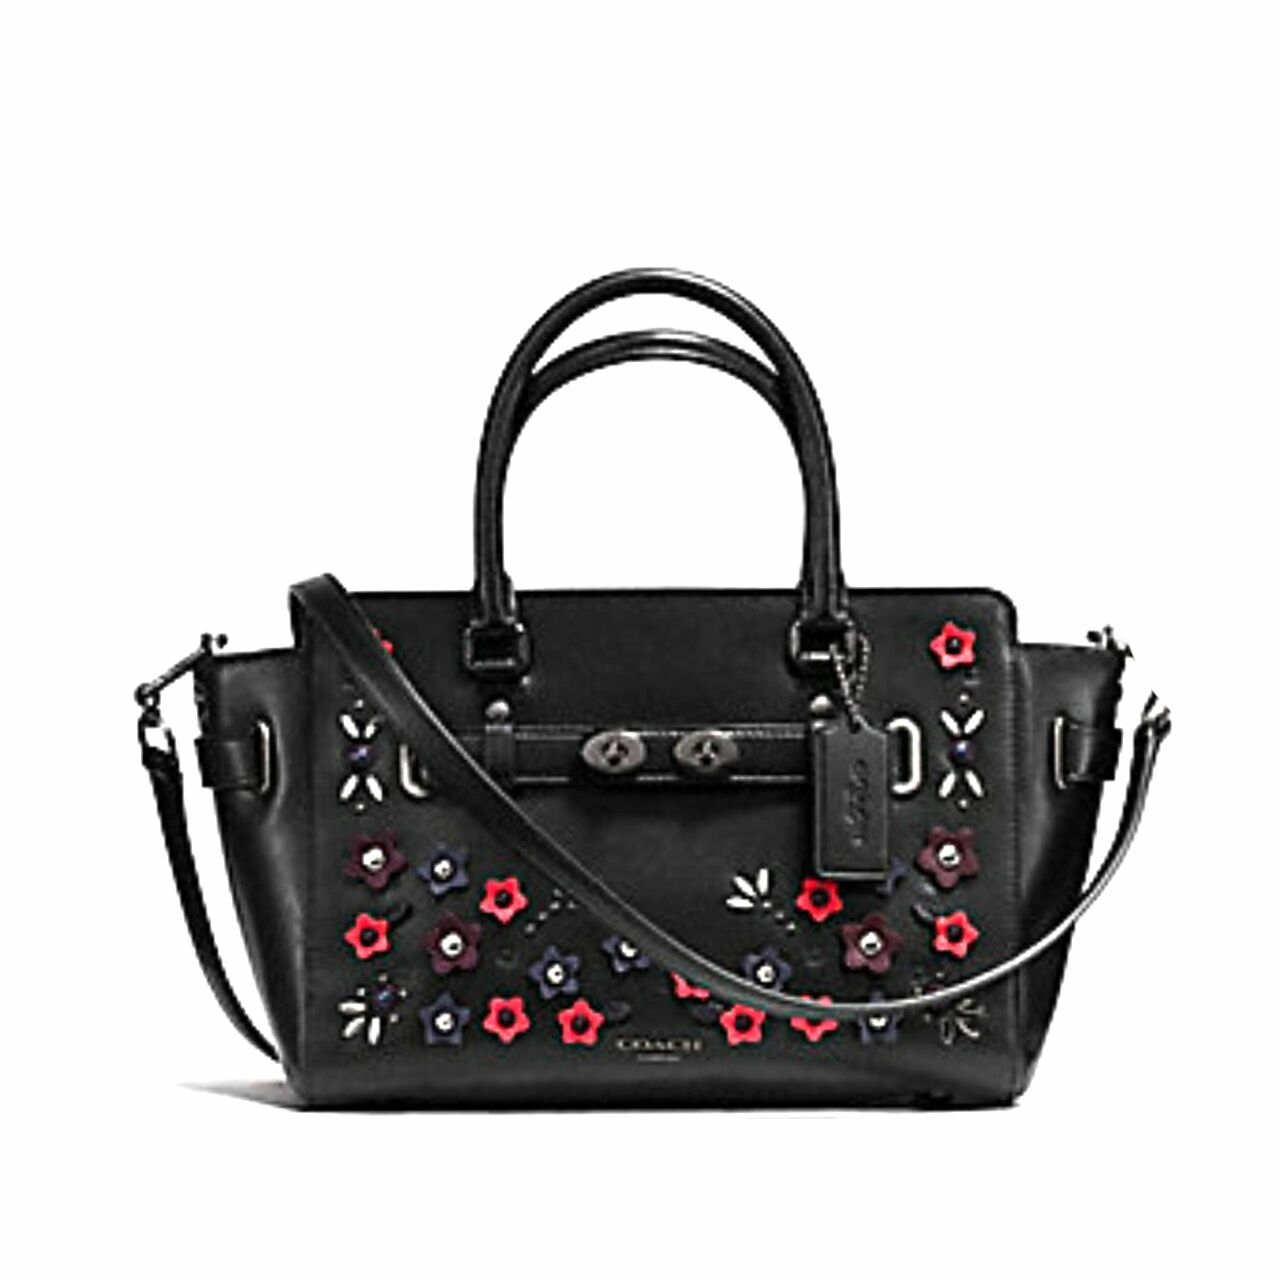 BLAKE CARRYALL 25 IN NATURAL REFINED LEATHER WITH FLORAL APPLIQUE (COACH F59450) ANTIQUE NICKEL/BLACK MULTI